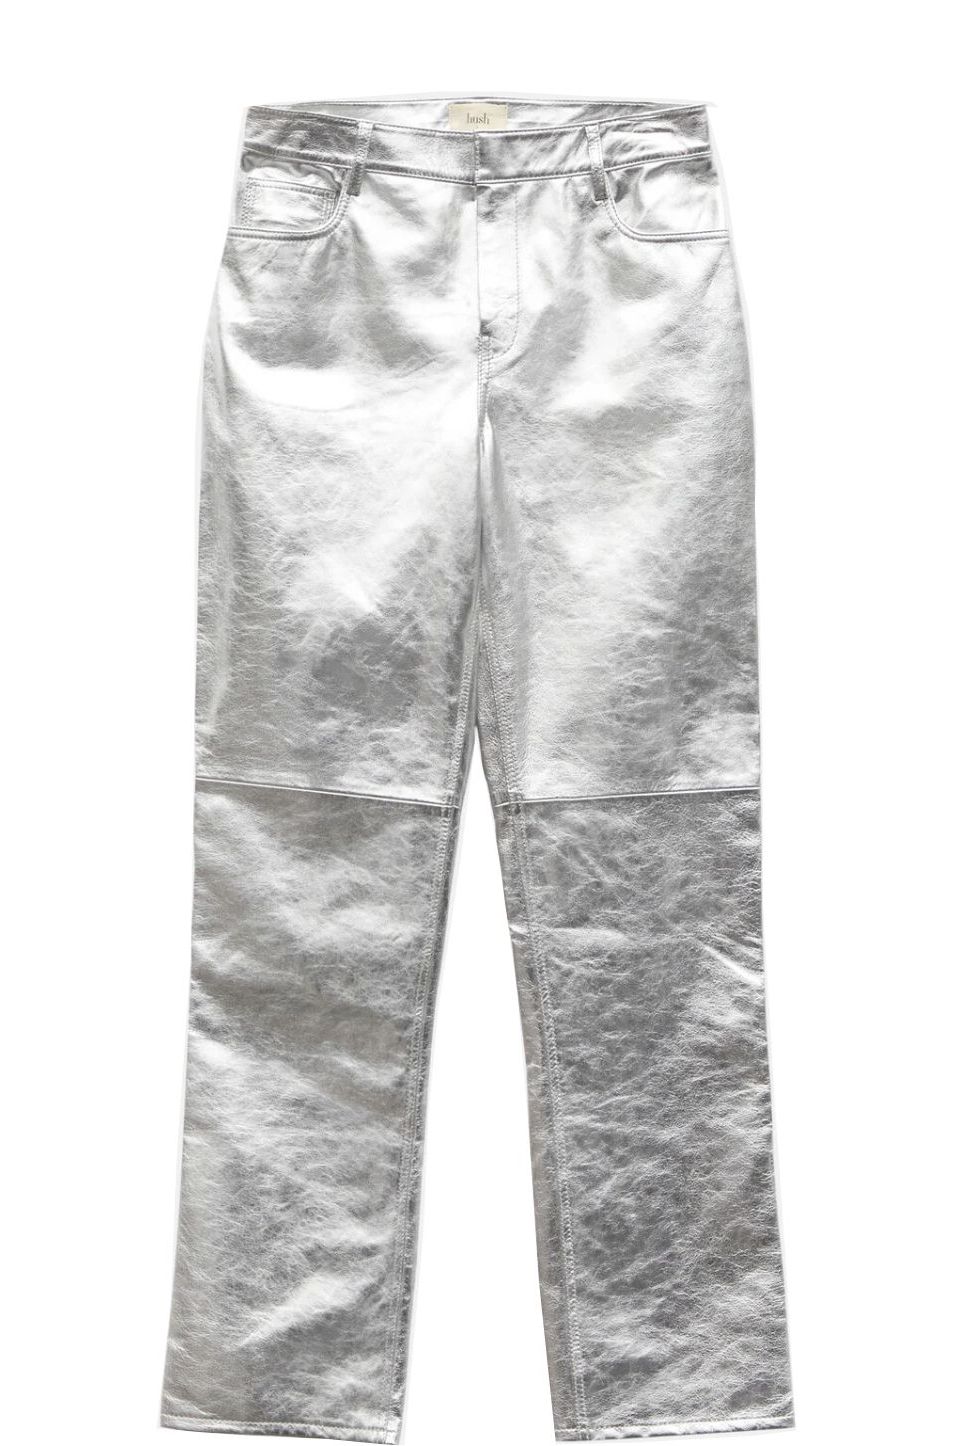 Silver trousers hot tend alert! 12 best silver trousers you've